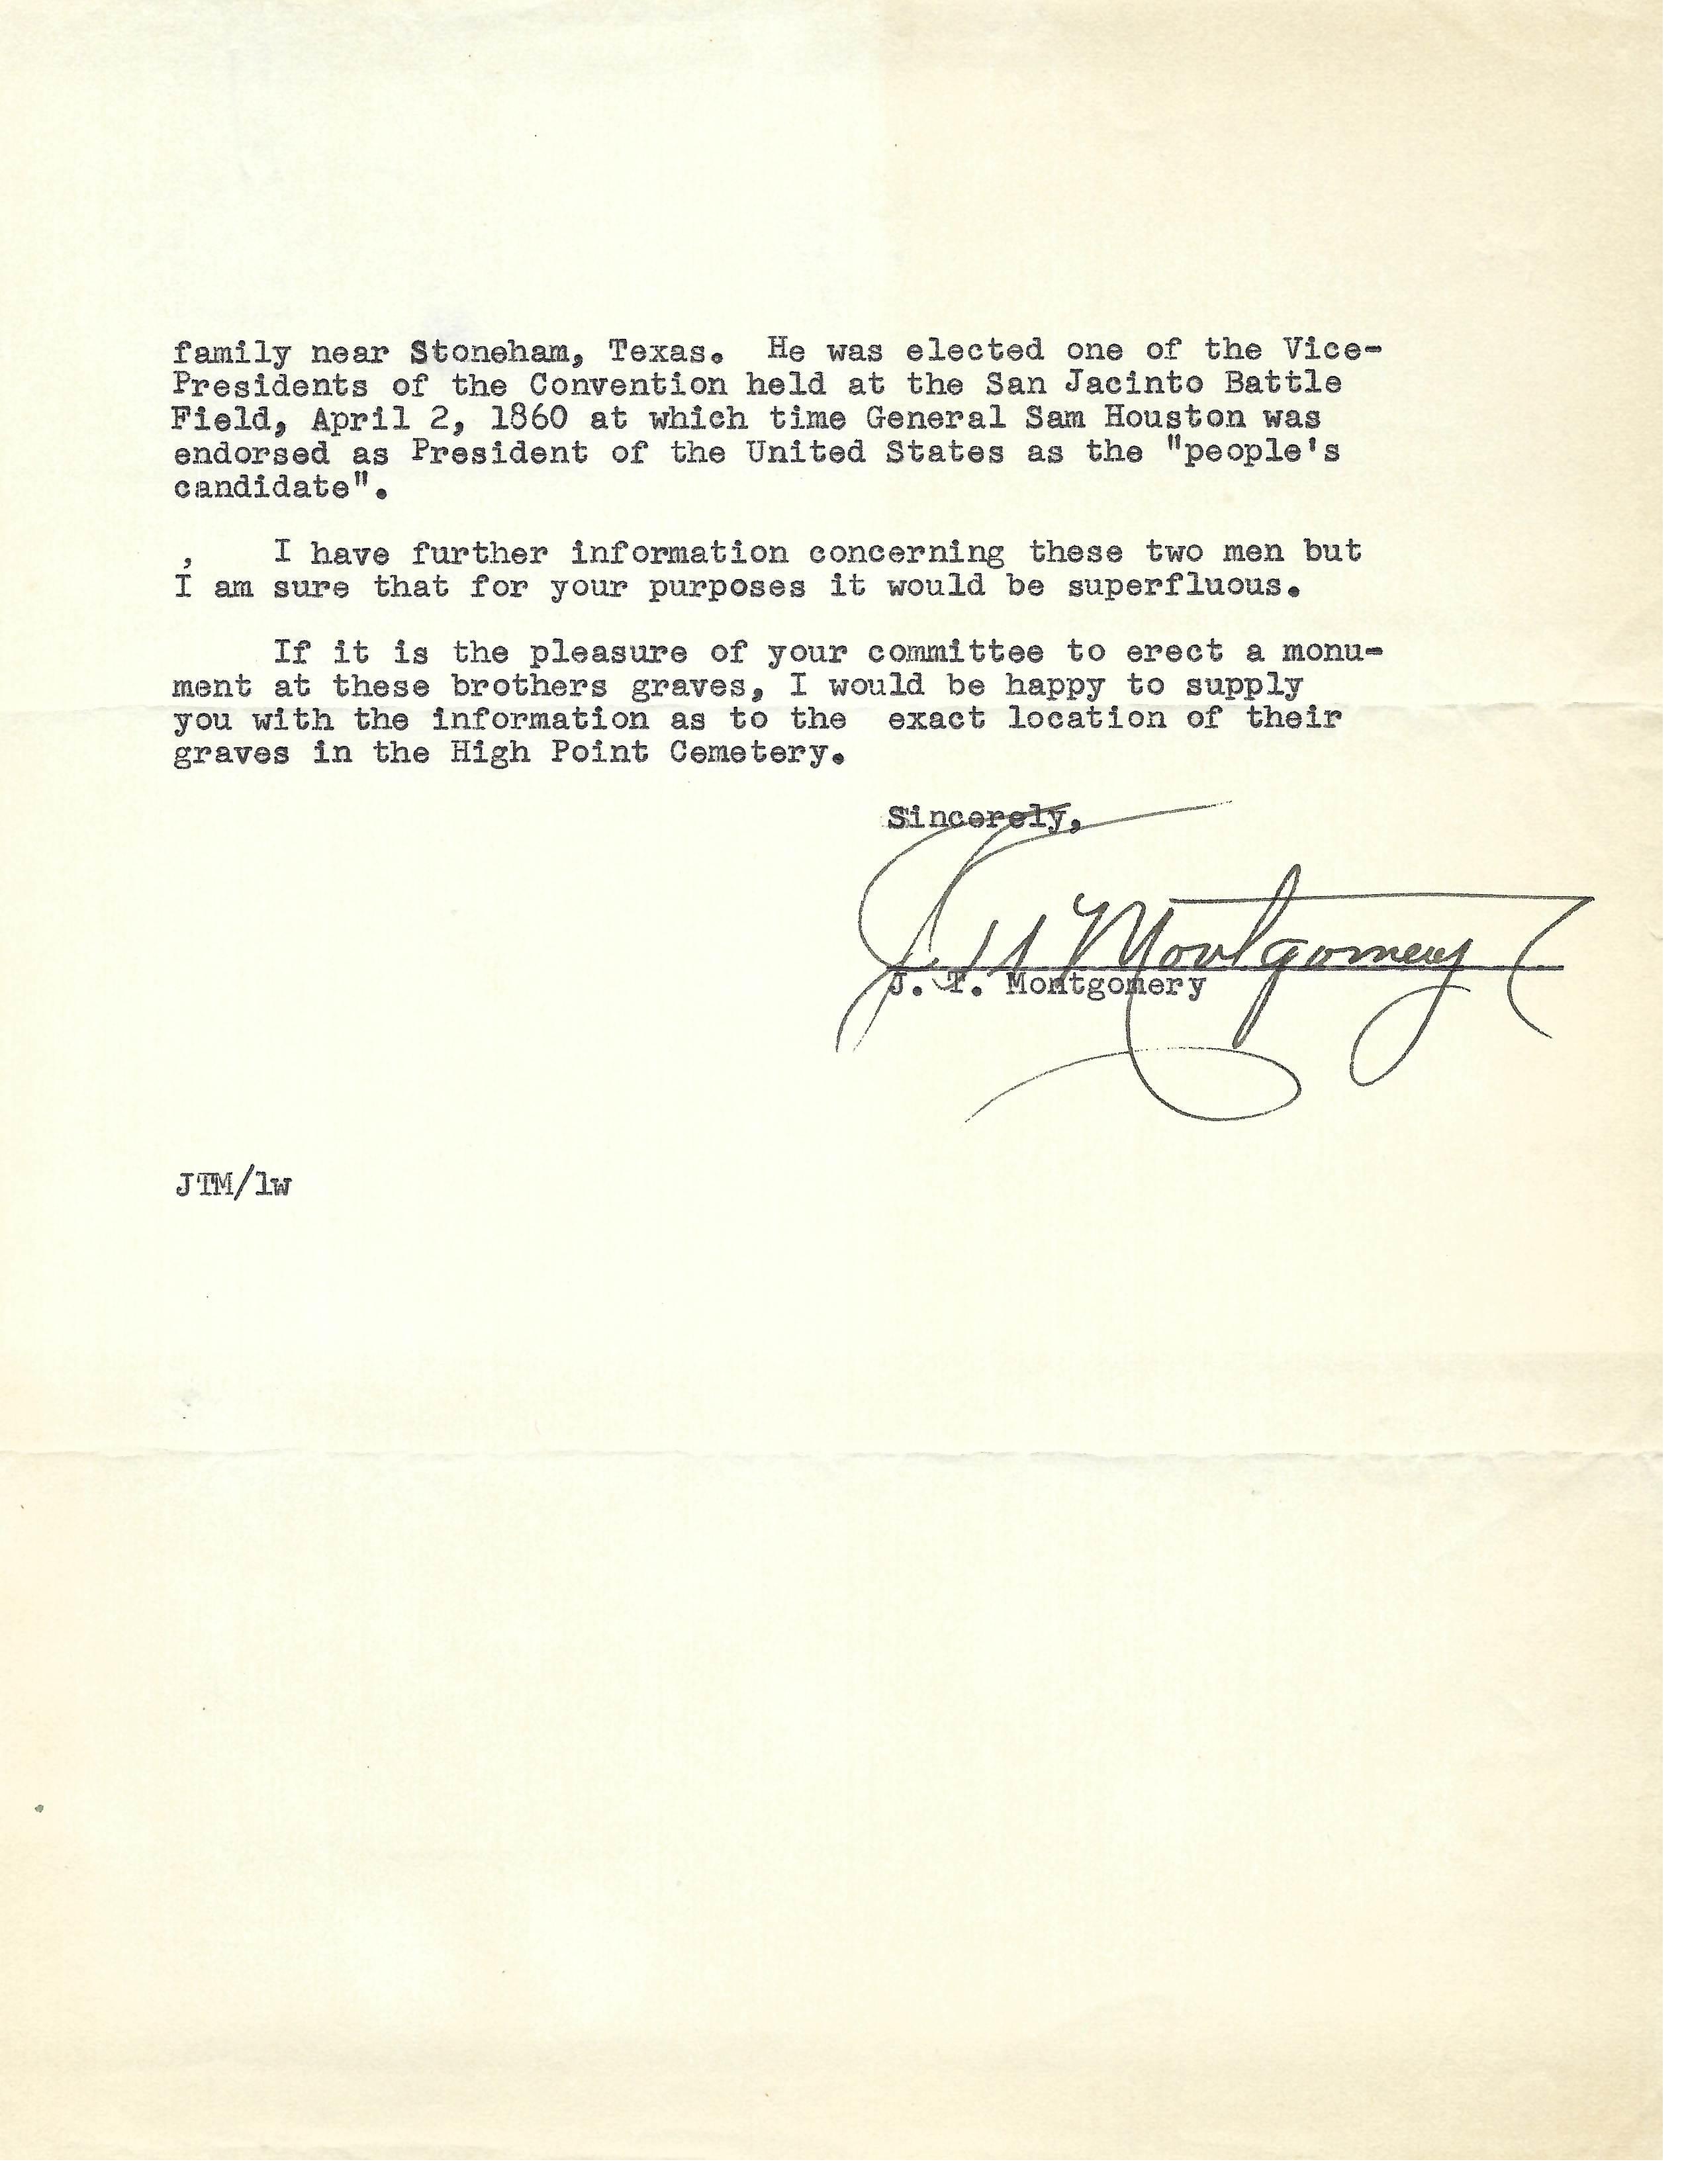 Second page of J. T.(James Troy) Montgomery's 1956 Letter to Texas Historical Foundation